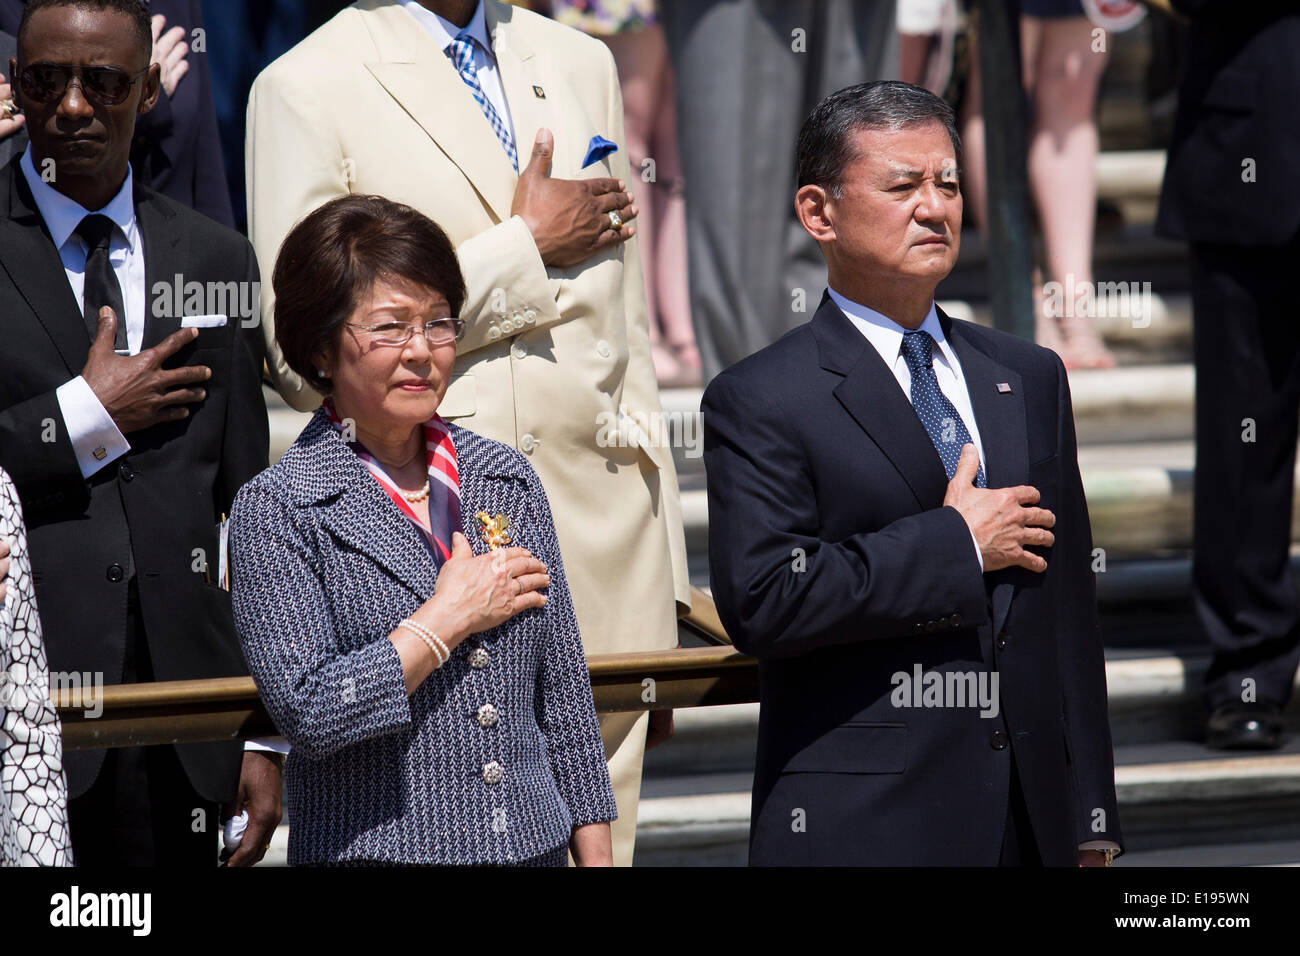 United States Secretary of Veterans Affairs Eric Shinseki (R) and his wife Patricia Shinseki (L) look on during as U.S. President Barack Obama attends a wreath laying ceremony at the Tomb of the Unknown Soldier at Arlington National Cemetery, May 26, 2014 in Arlington, Virginia. President Obama returned to Washington Monday morning after a surprise visit to Afghanistan to visit U.S. troops at Bagram Air Field. Credit: Drew Angerer / Pool via CNP Stock Photo